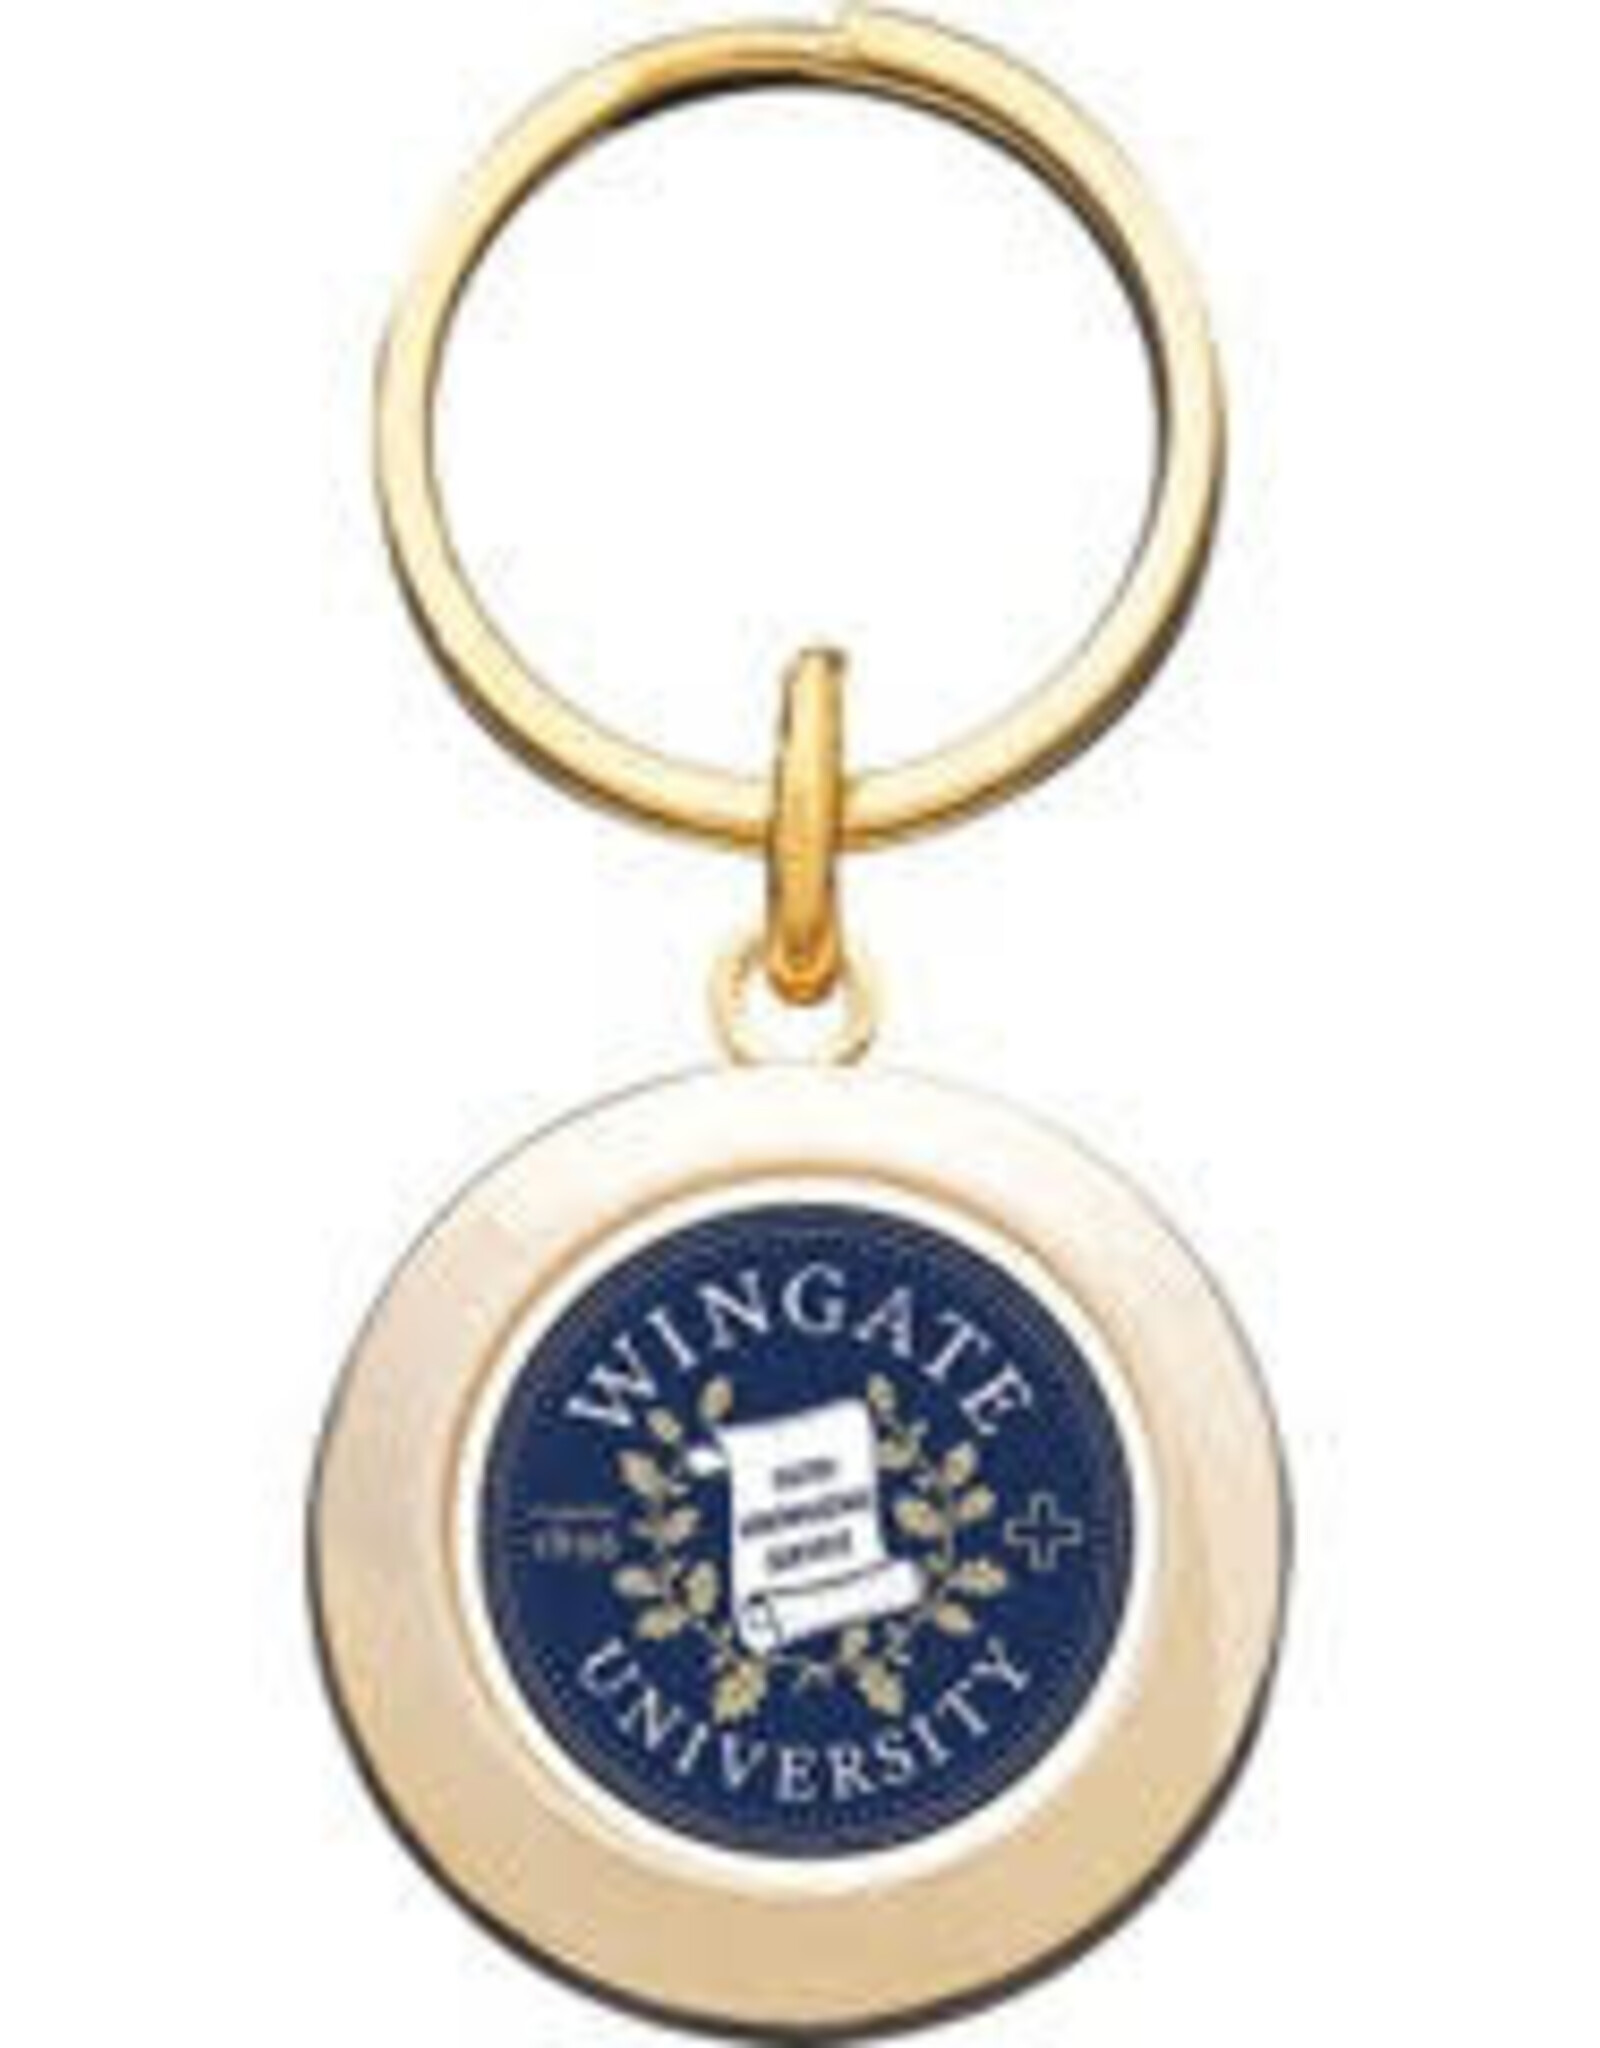 Jardine Gold Prestige Round Seal Keychain - Wingate Outfitters